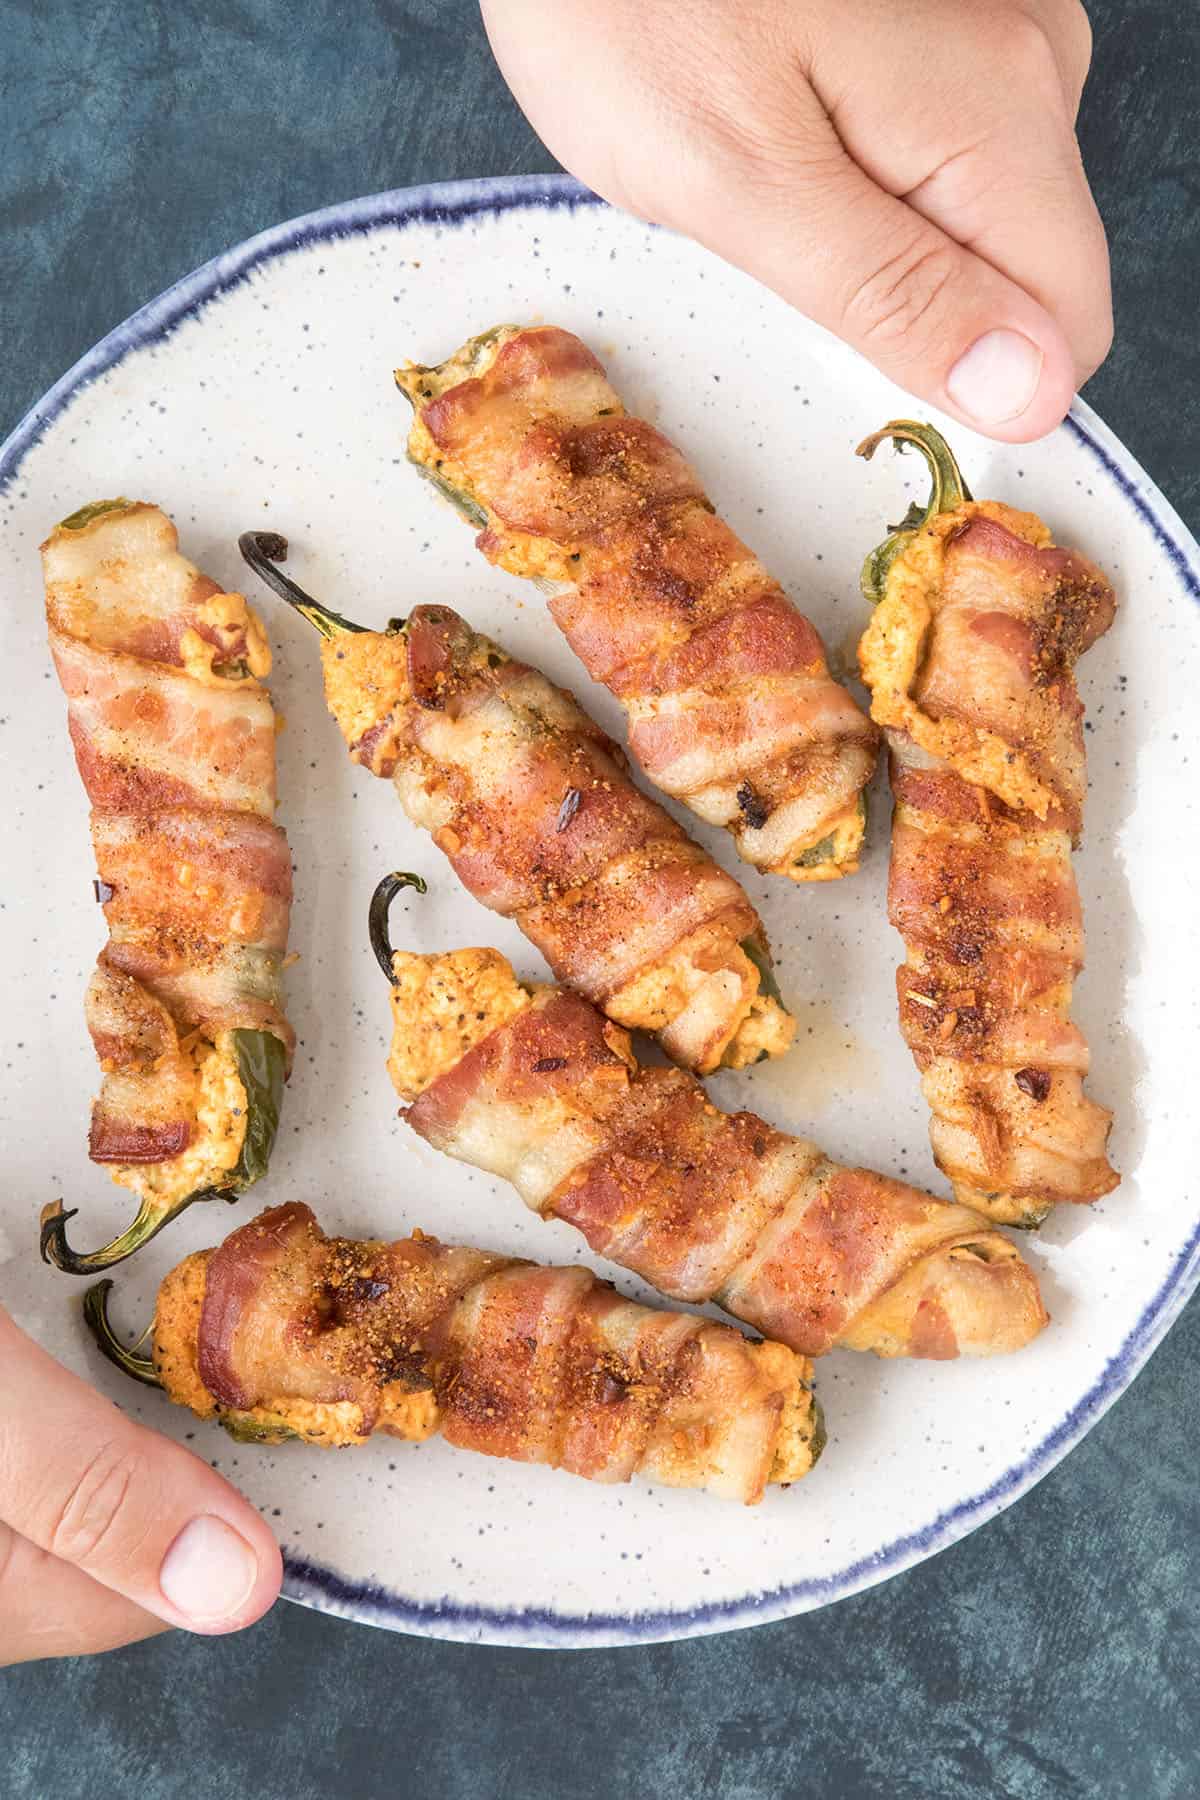 Bacon Wrapped Jalapeno Poppers - On a plate, ready to serve